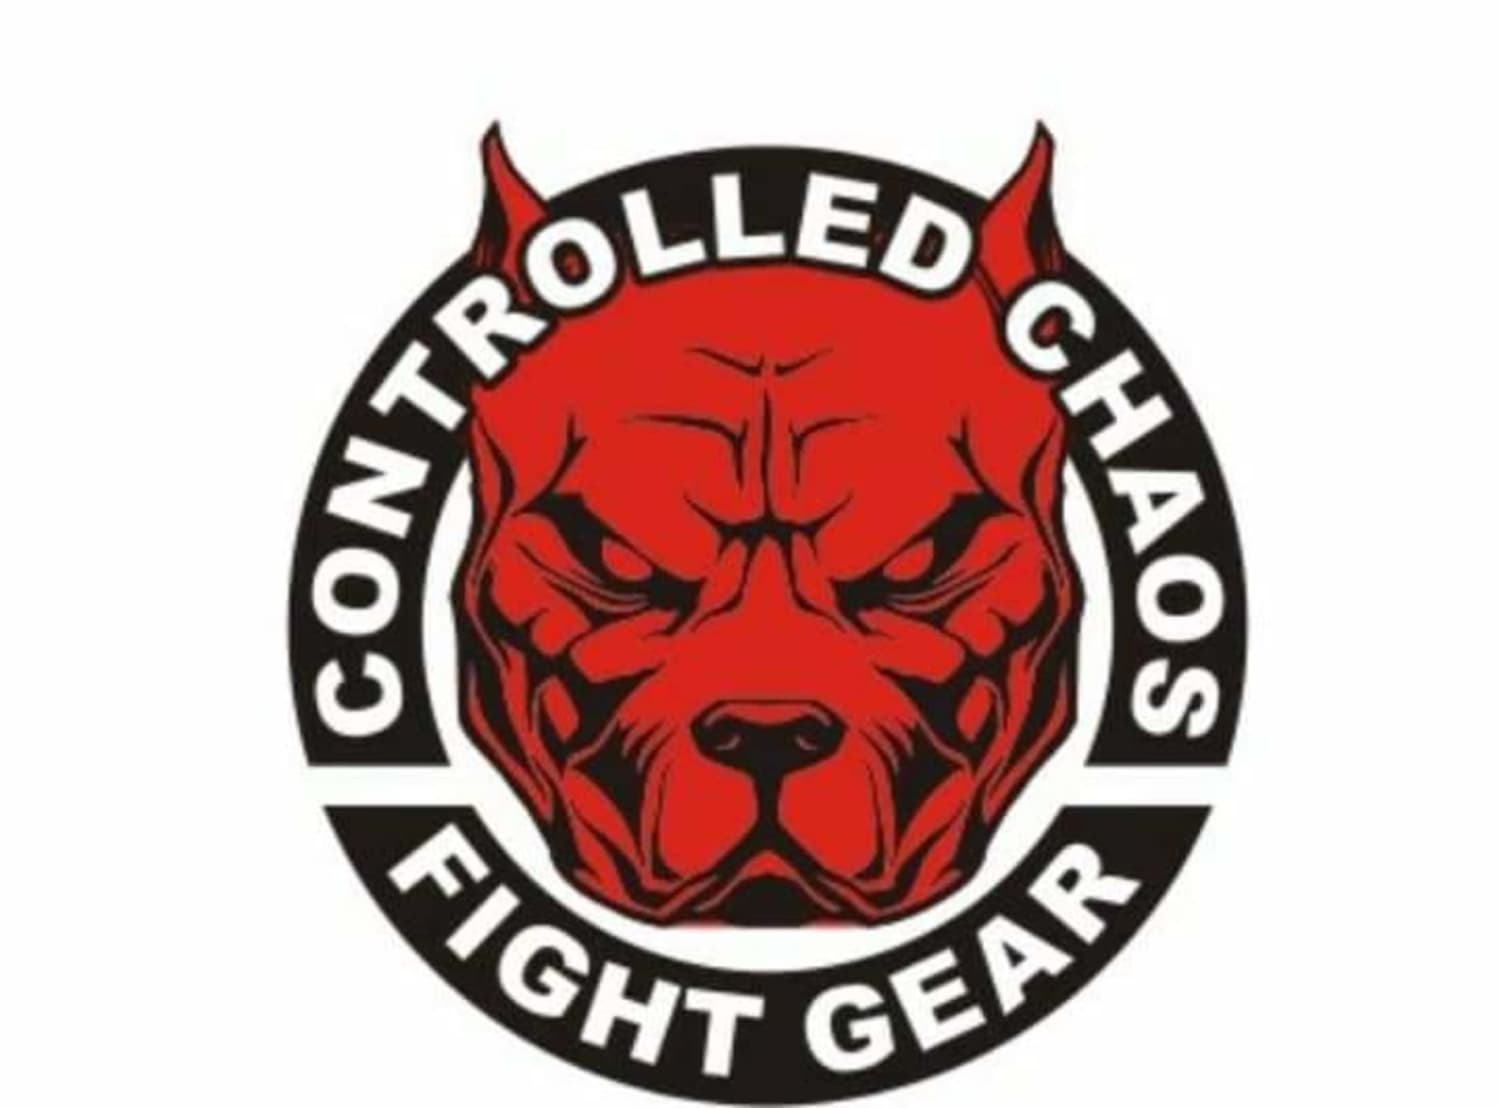 Controlled Chaos Fight Gear